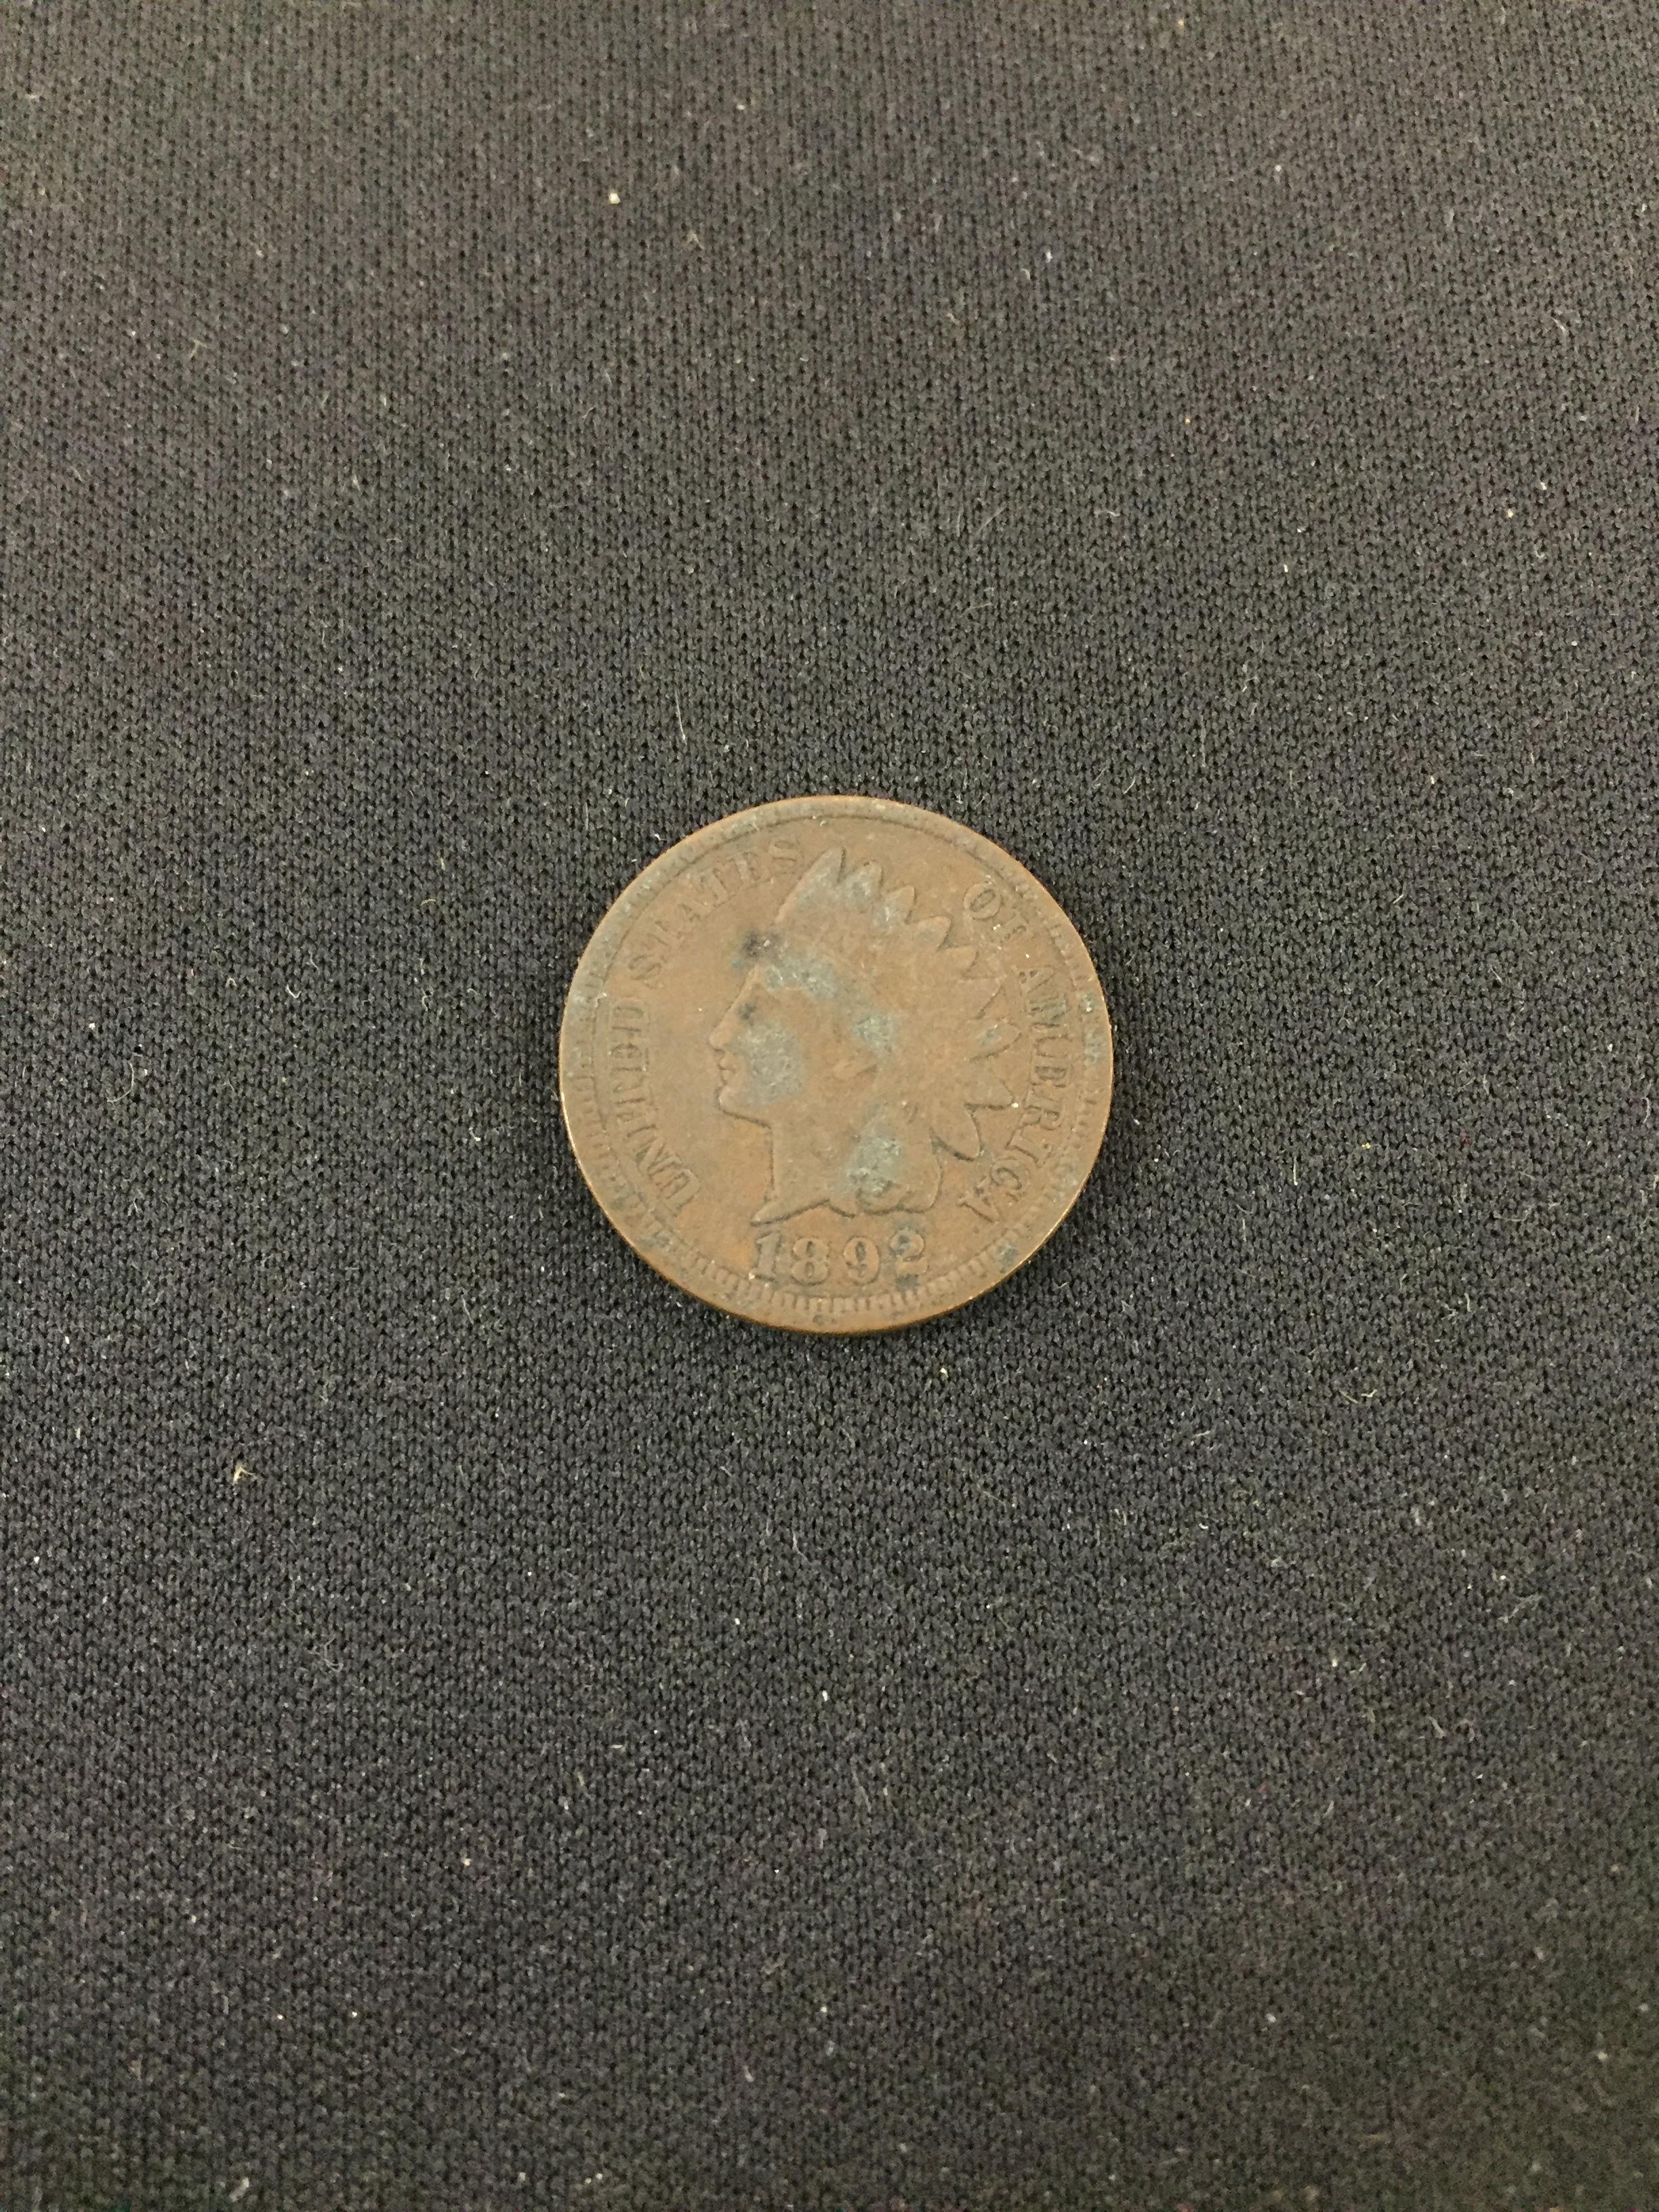 1892 United States Indian Head Penny